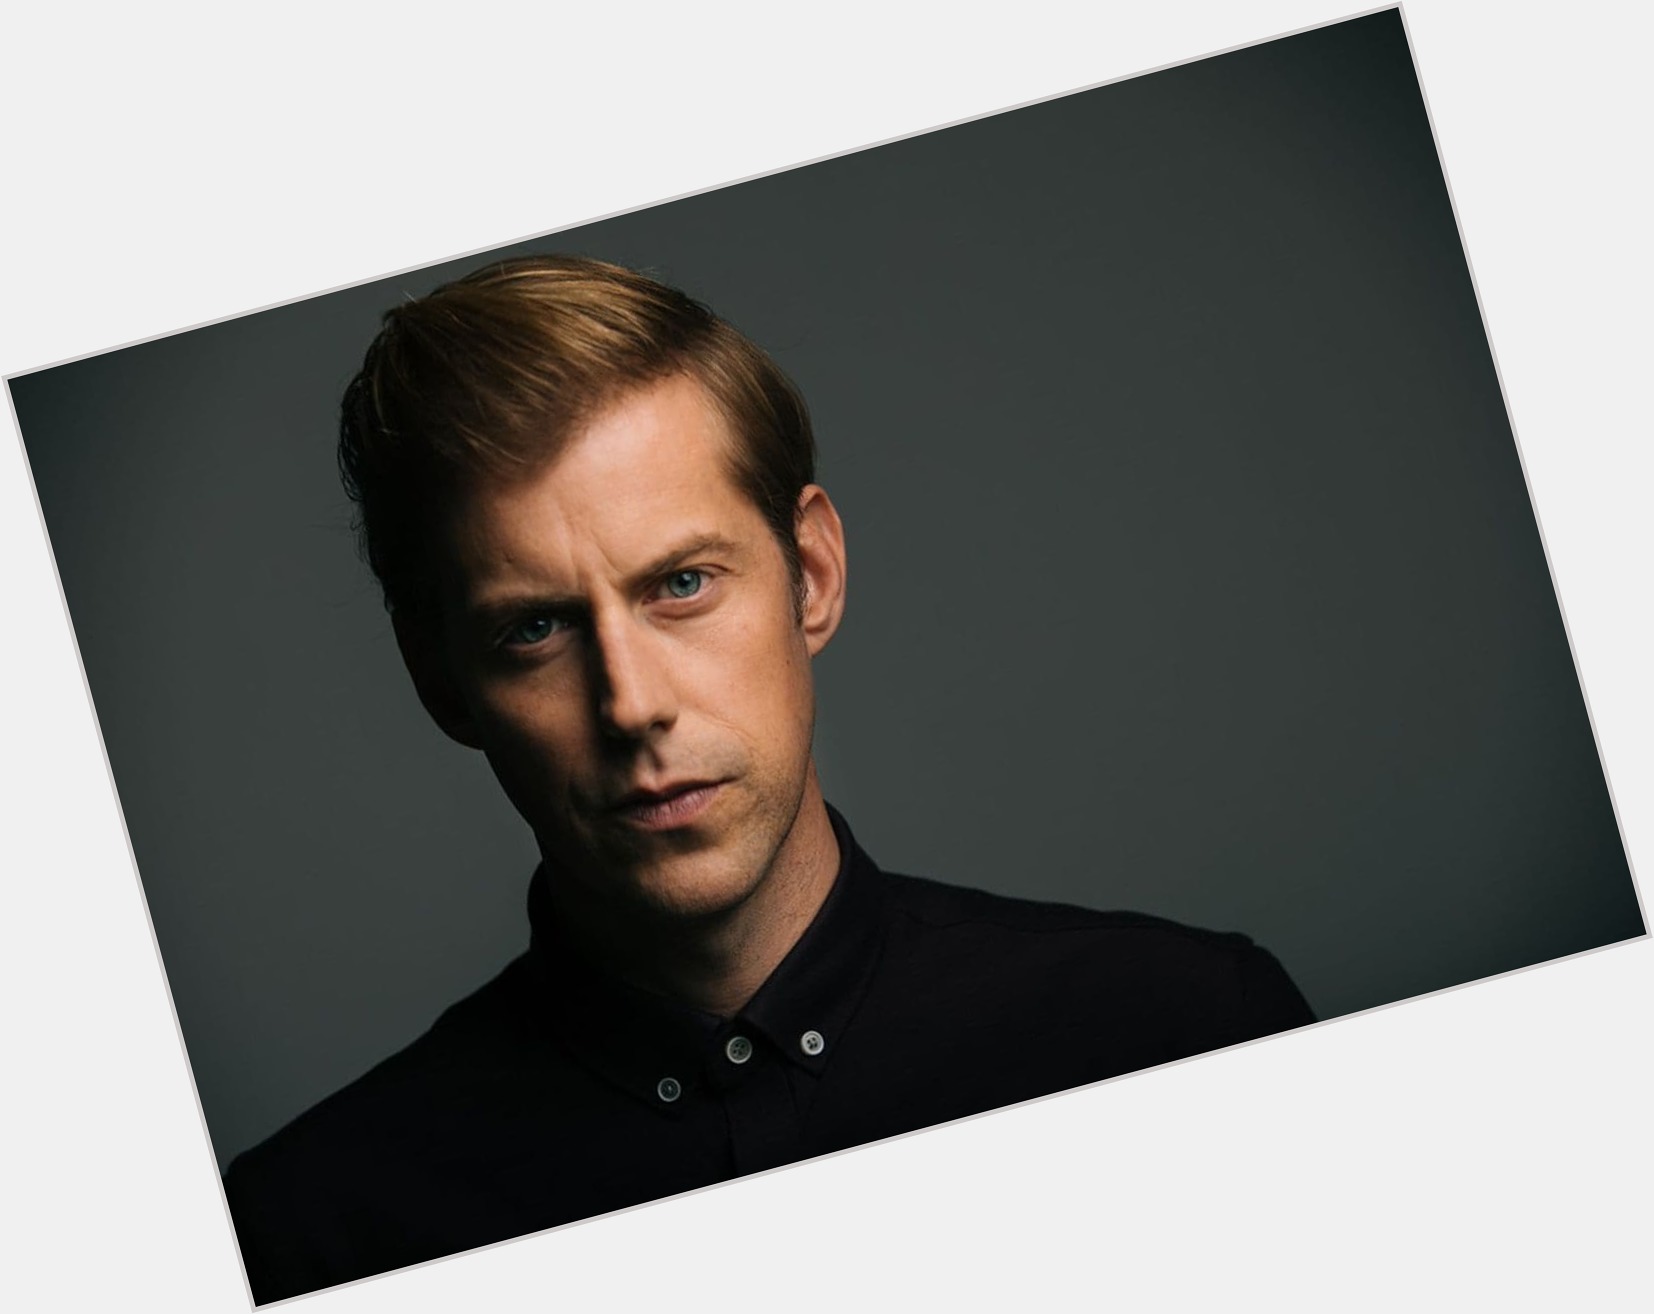 <a href="/hot-men/andrew-mcmahon/where-dating-news-photos">Andrew Mcmahon</a>  